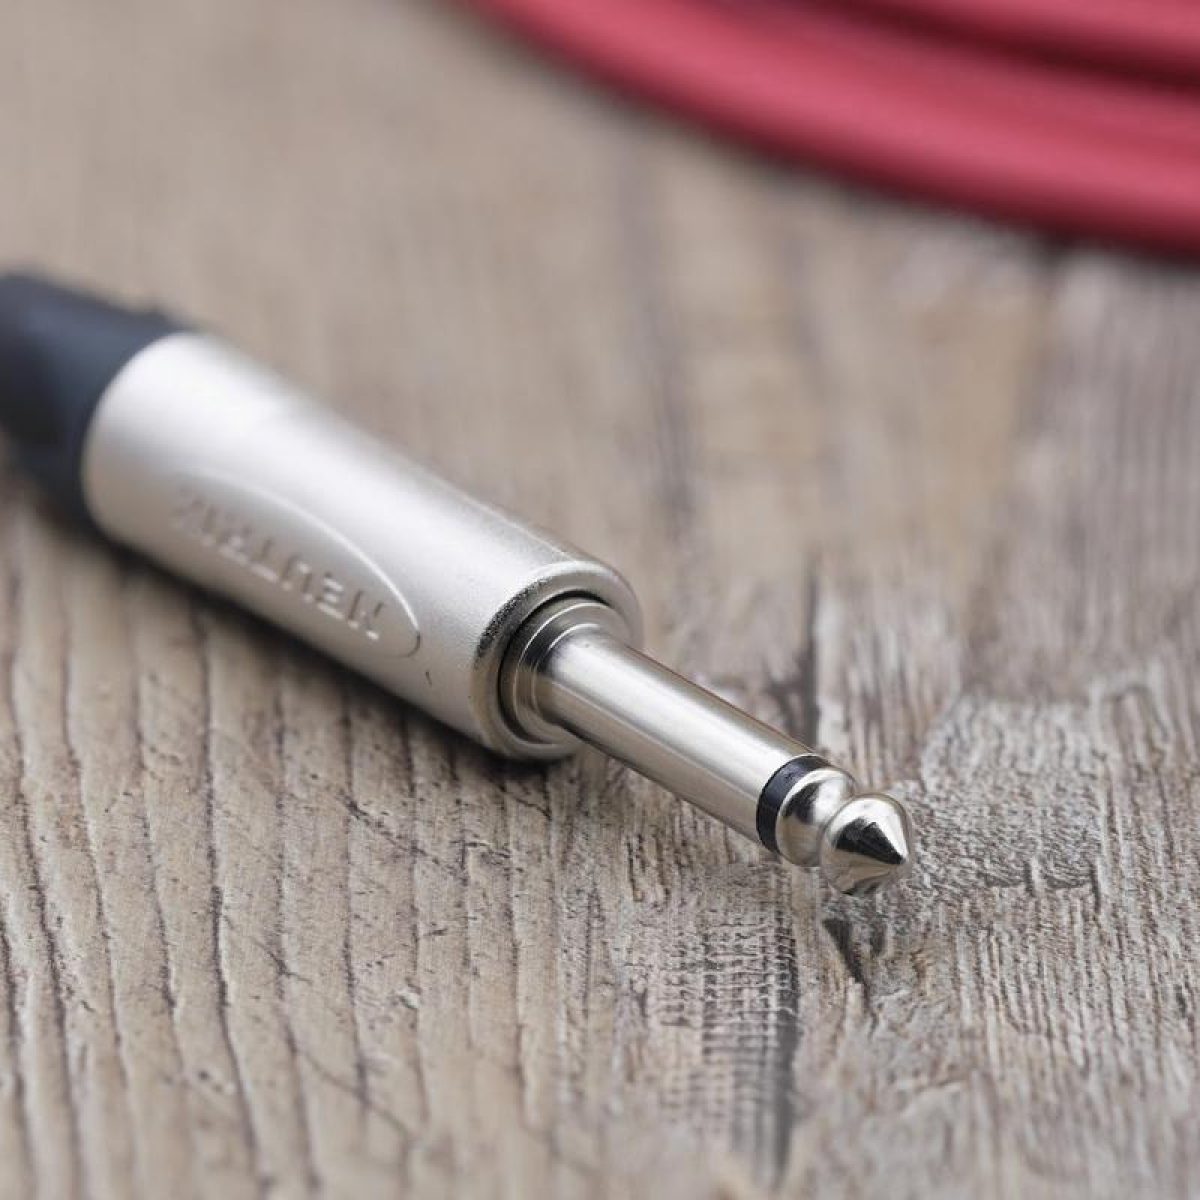 Choosing The Right Jack: Selecting Audio Jacks For Your Headset